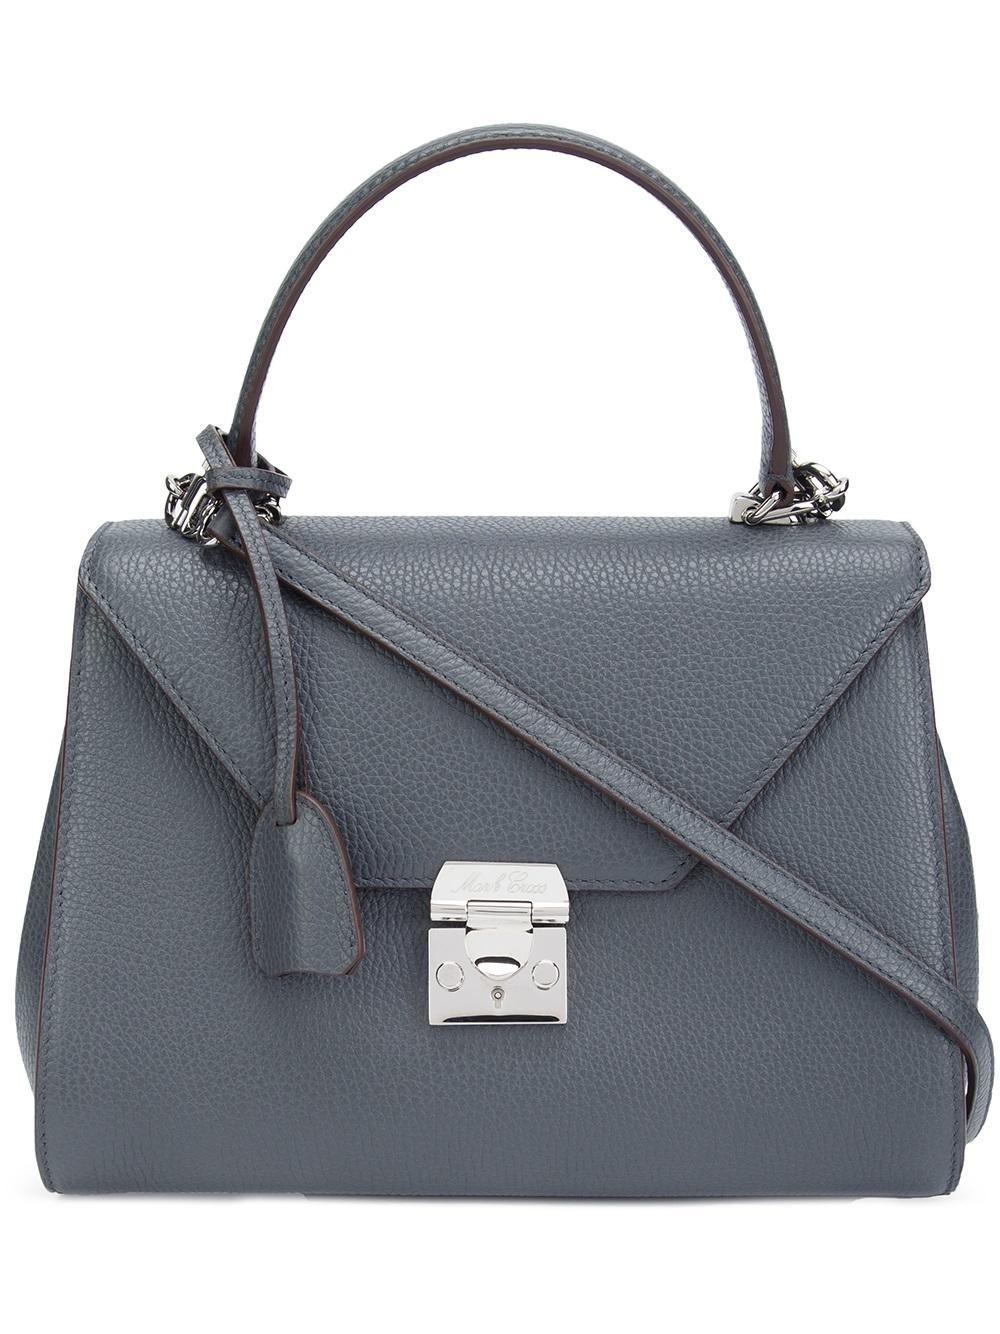 Mark Cross Leather Tote Bag in Gray - Lyst